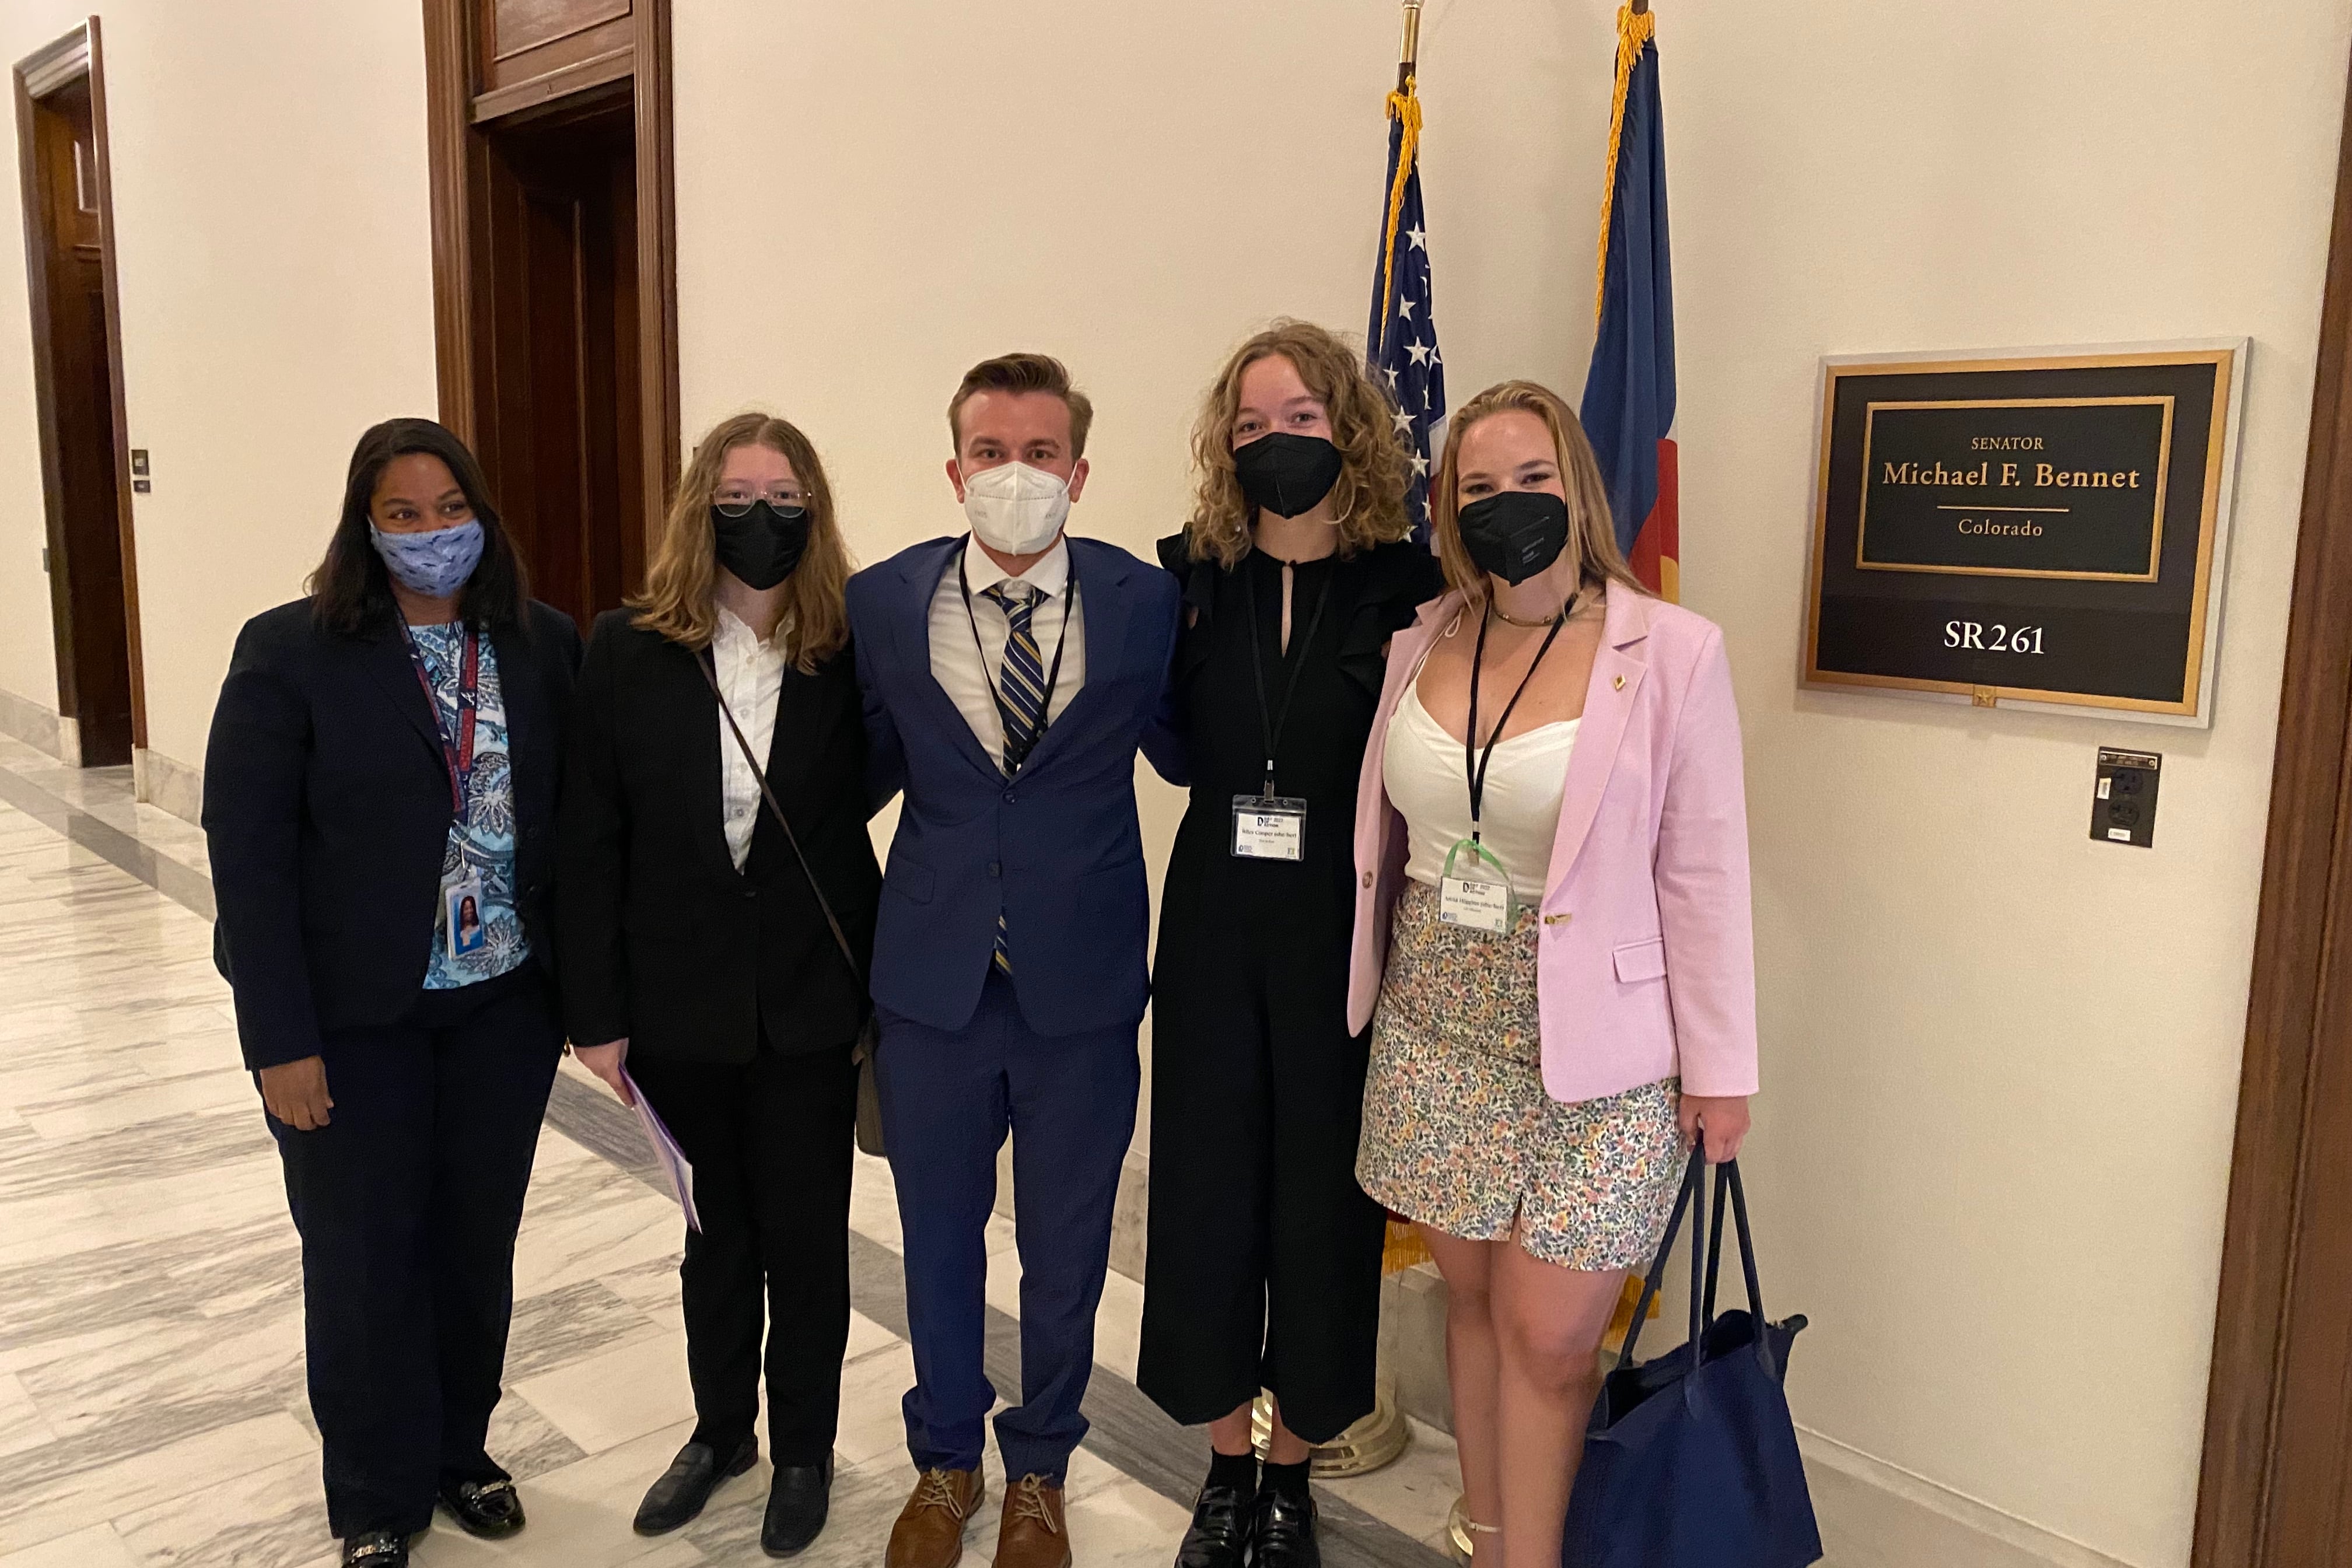 A group of young people in suit jackets and dress pants or skirts pose for a photo in the hallway of a Congressional office building. They’re wearing masks and standing shoulder to shoulder. A sign indicates they are in front of the office of U.S. Senator Michael Bennet. 